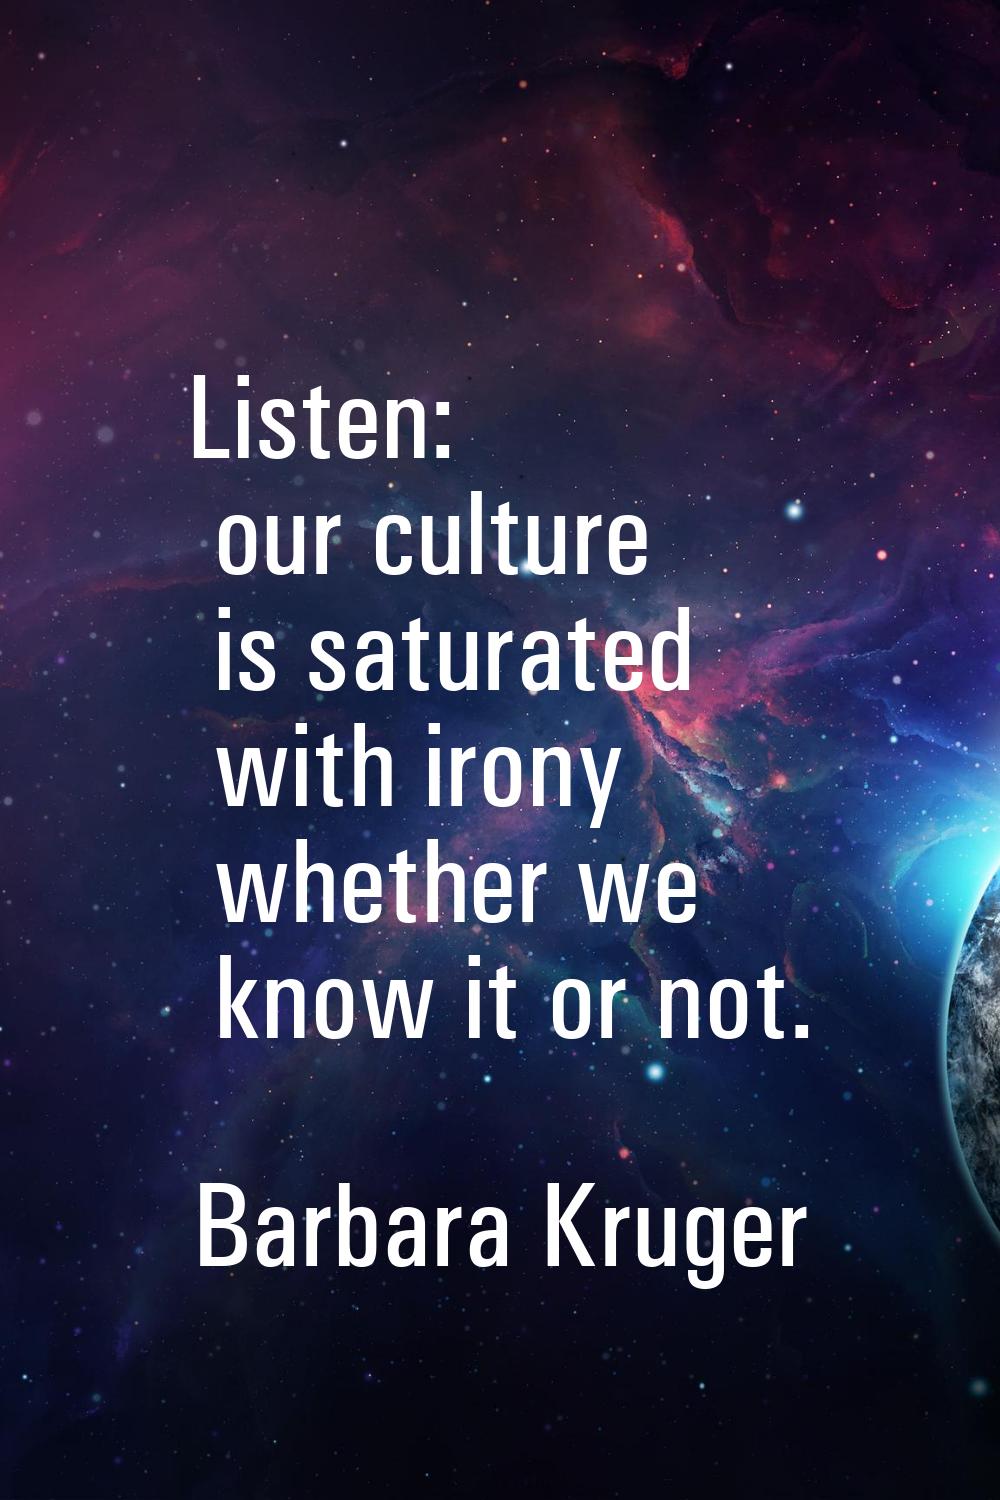 Listen: our culture is saturated with irony whether we know it or not.